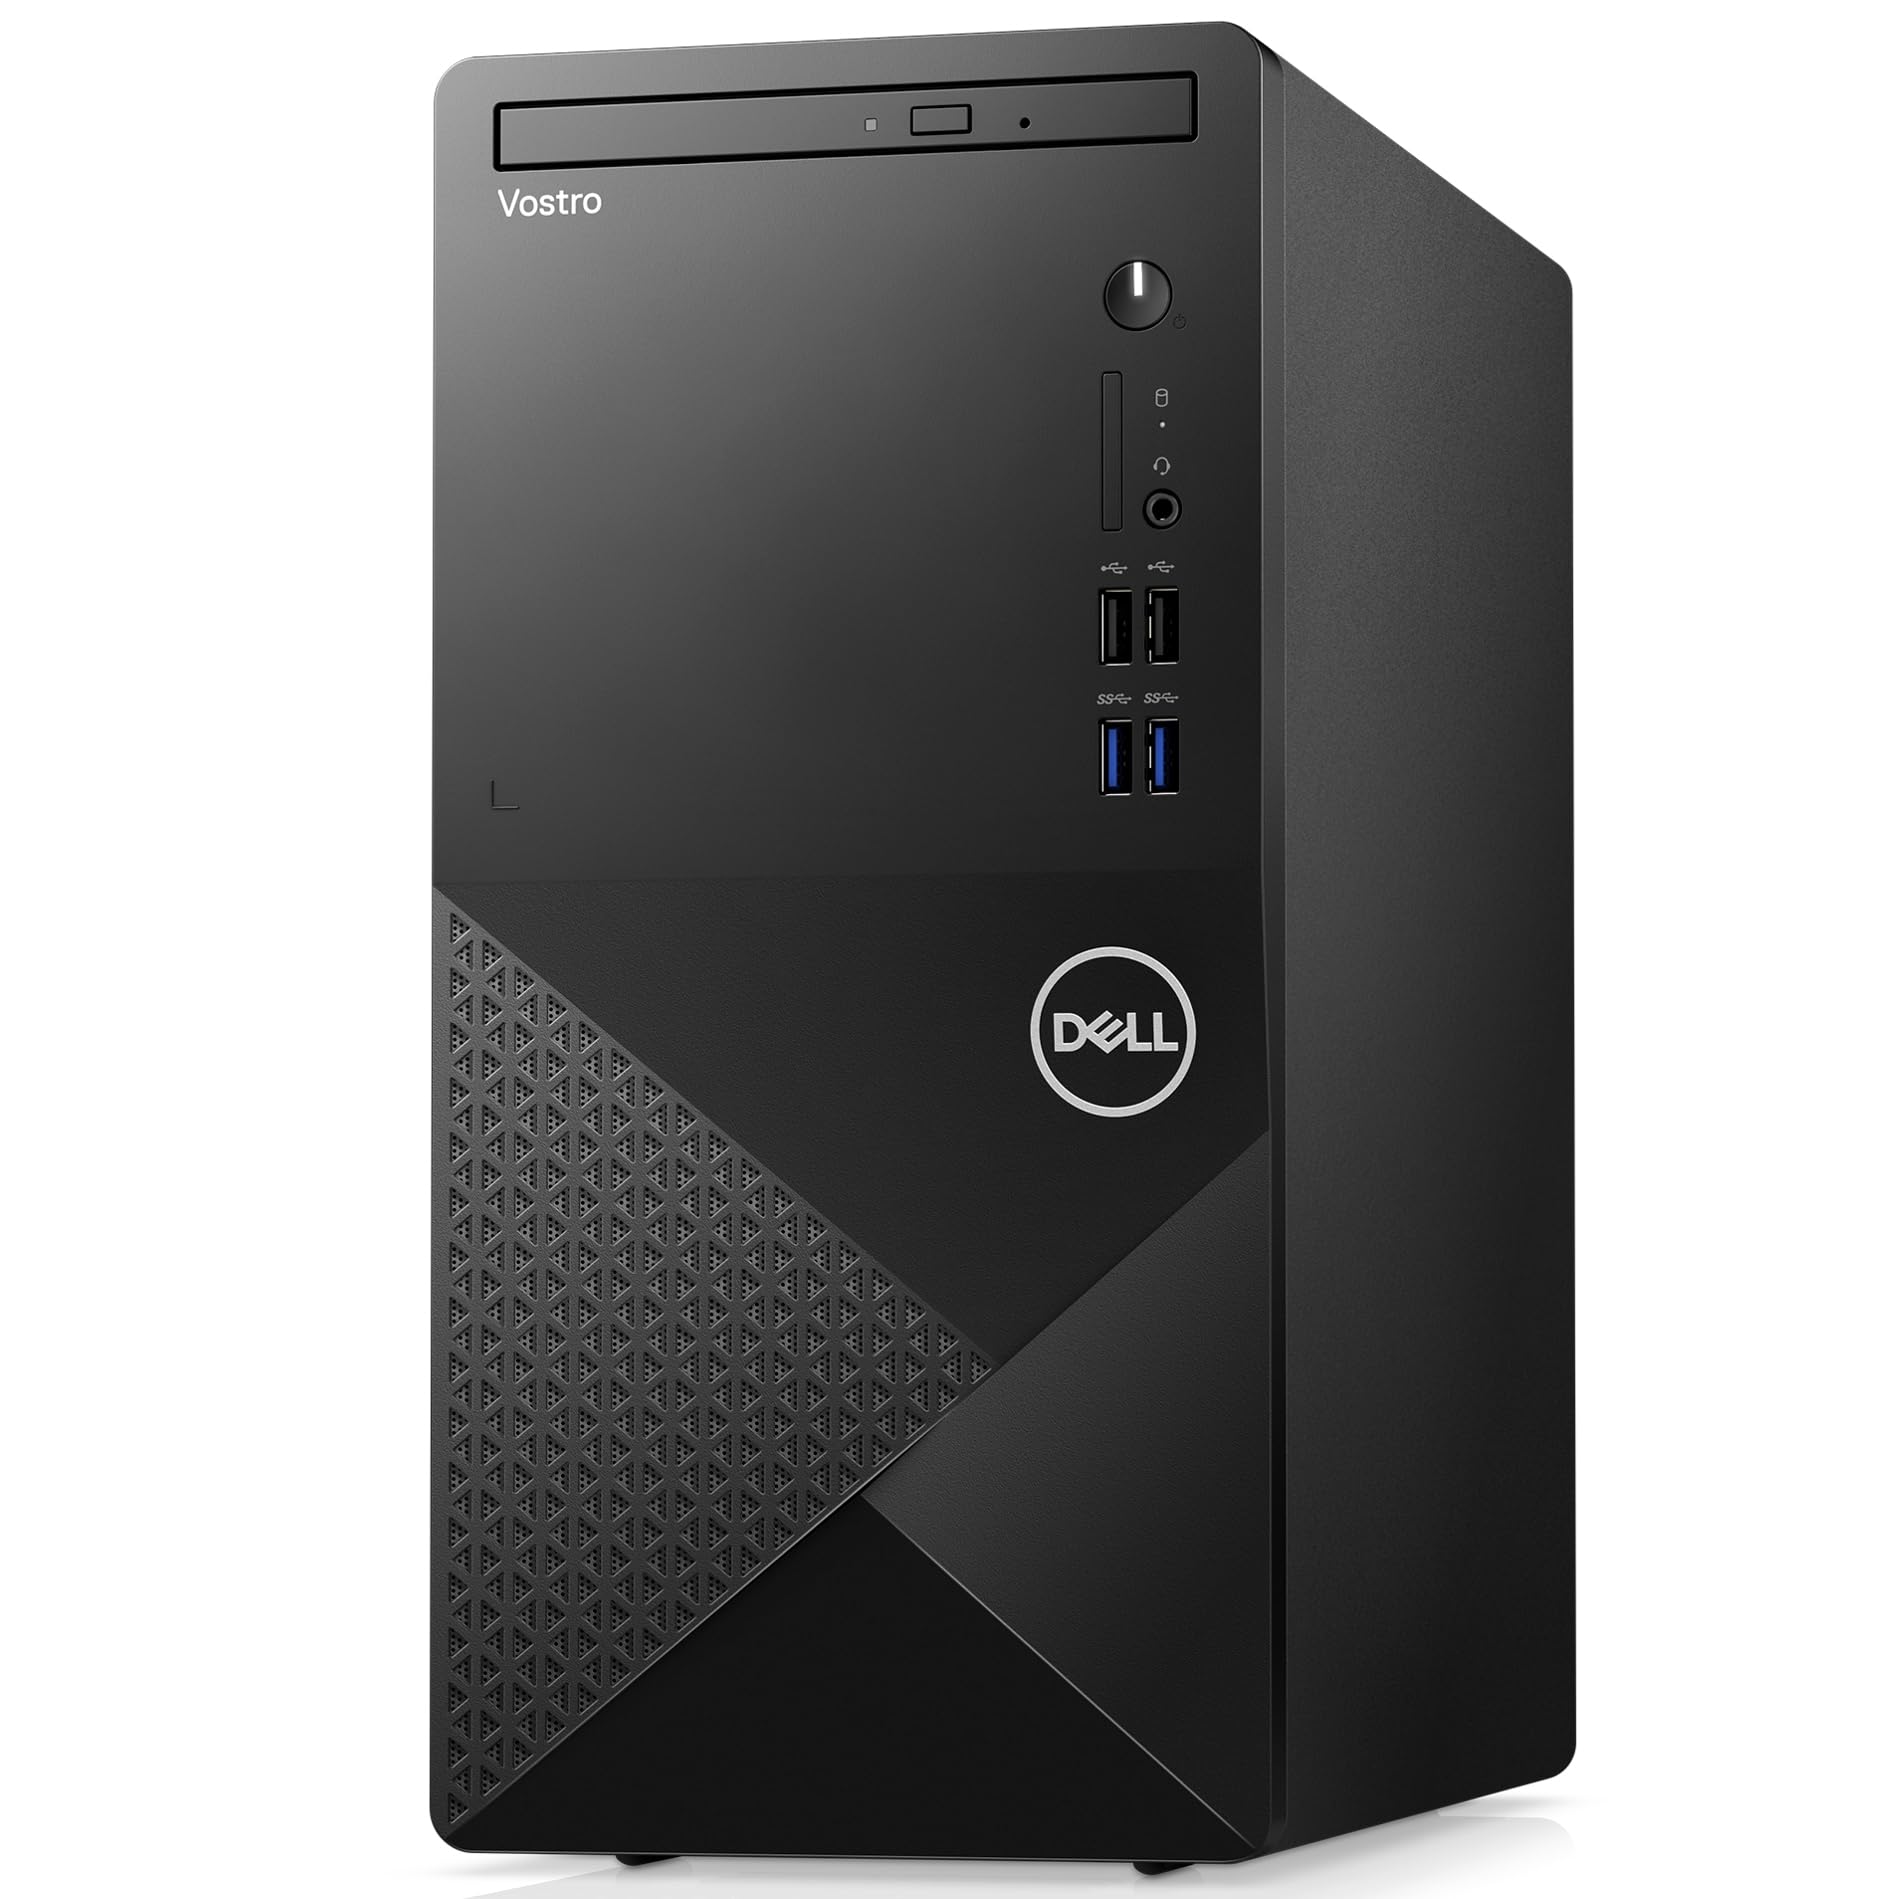 Dell 2023 Vostro 3910 Business Tower Desktop, 12th Gen Intel 12-Core i7-12700 up to 4.9GHz, 32GB DDR4 RAM, 2TB PCIe SSD, DVDRW, 802.11AC WiFi, Bluetooth 5, Keyboard & Mouse, Windows 11 Pro